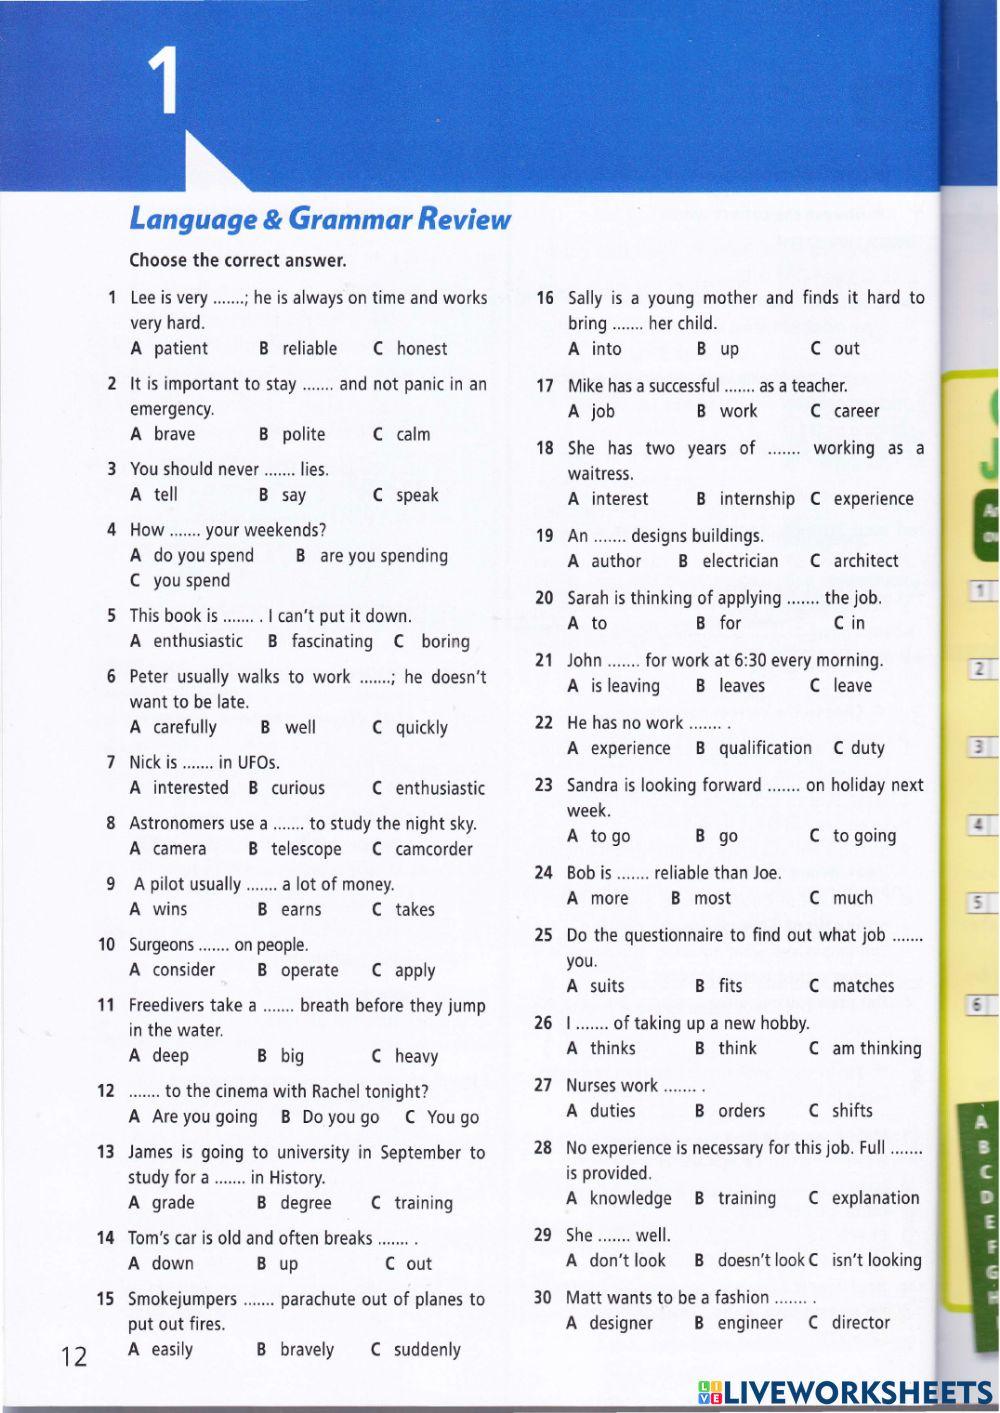 Language and Grammar Review